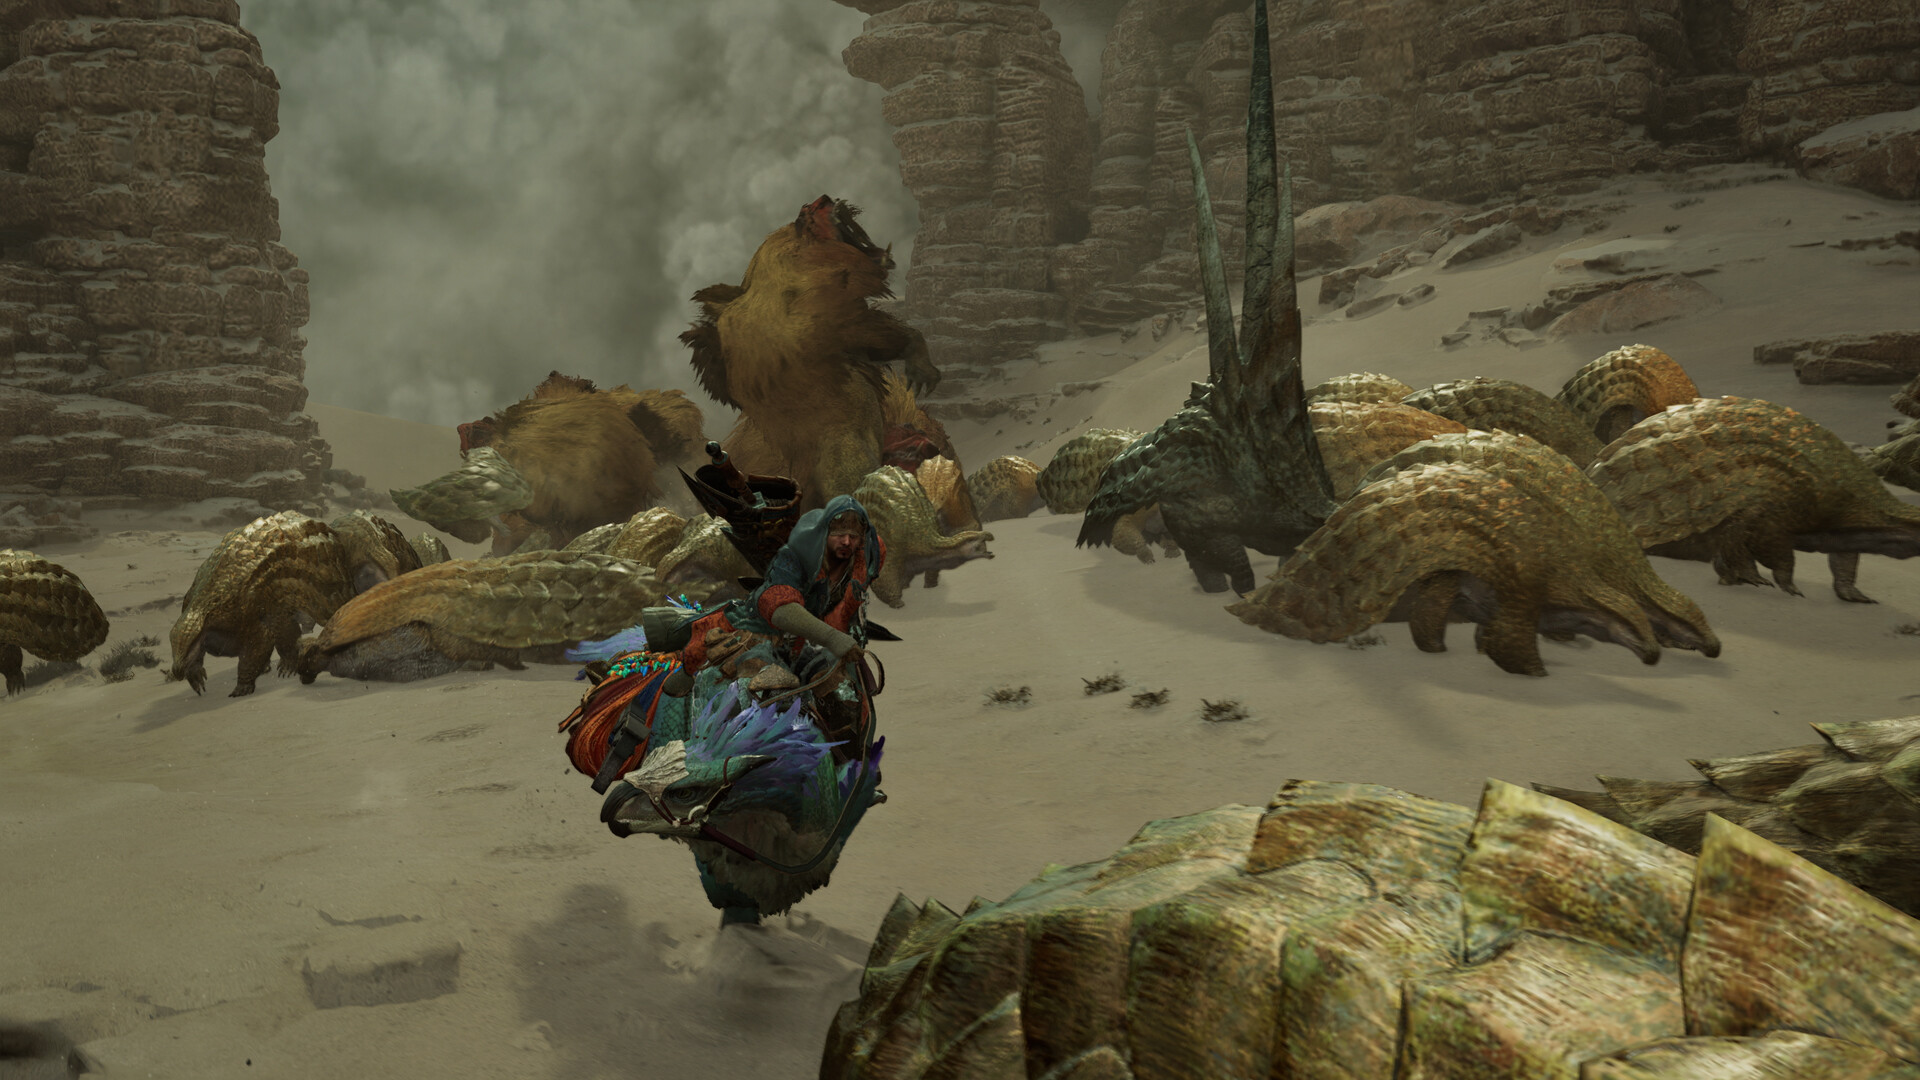 New Monster Hunter Wilds Trailer Shown At PlayStation State of Play